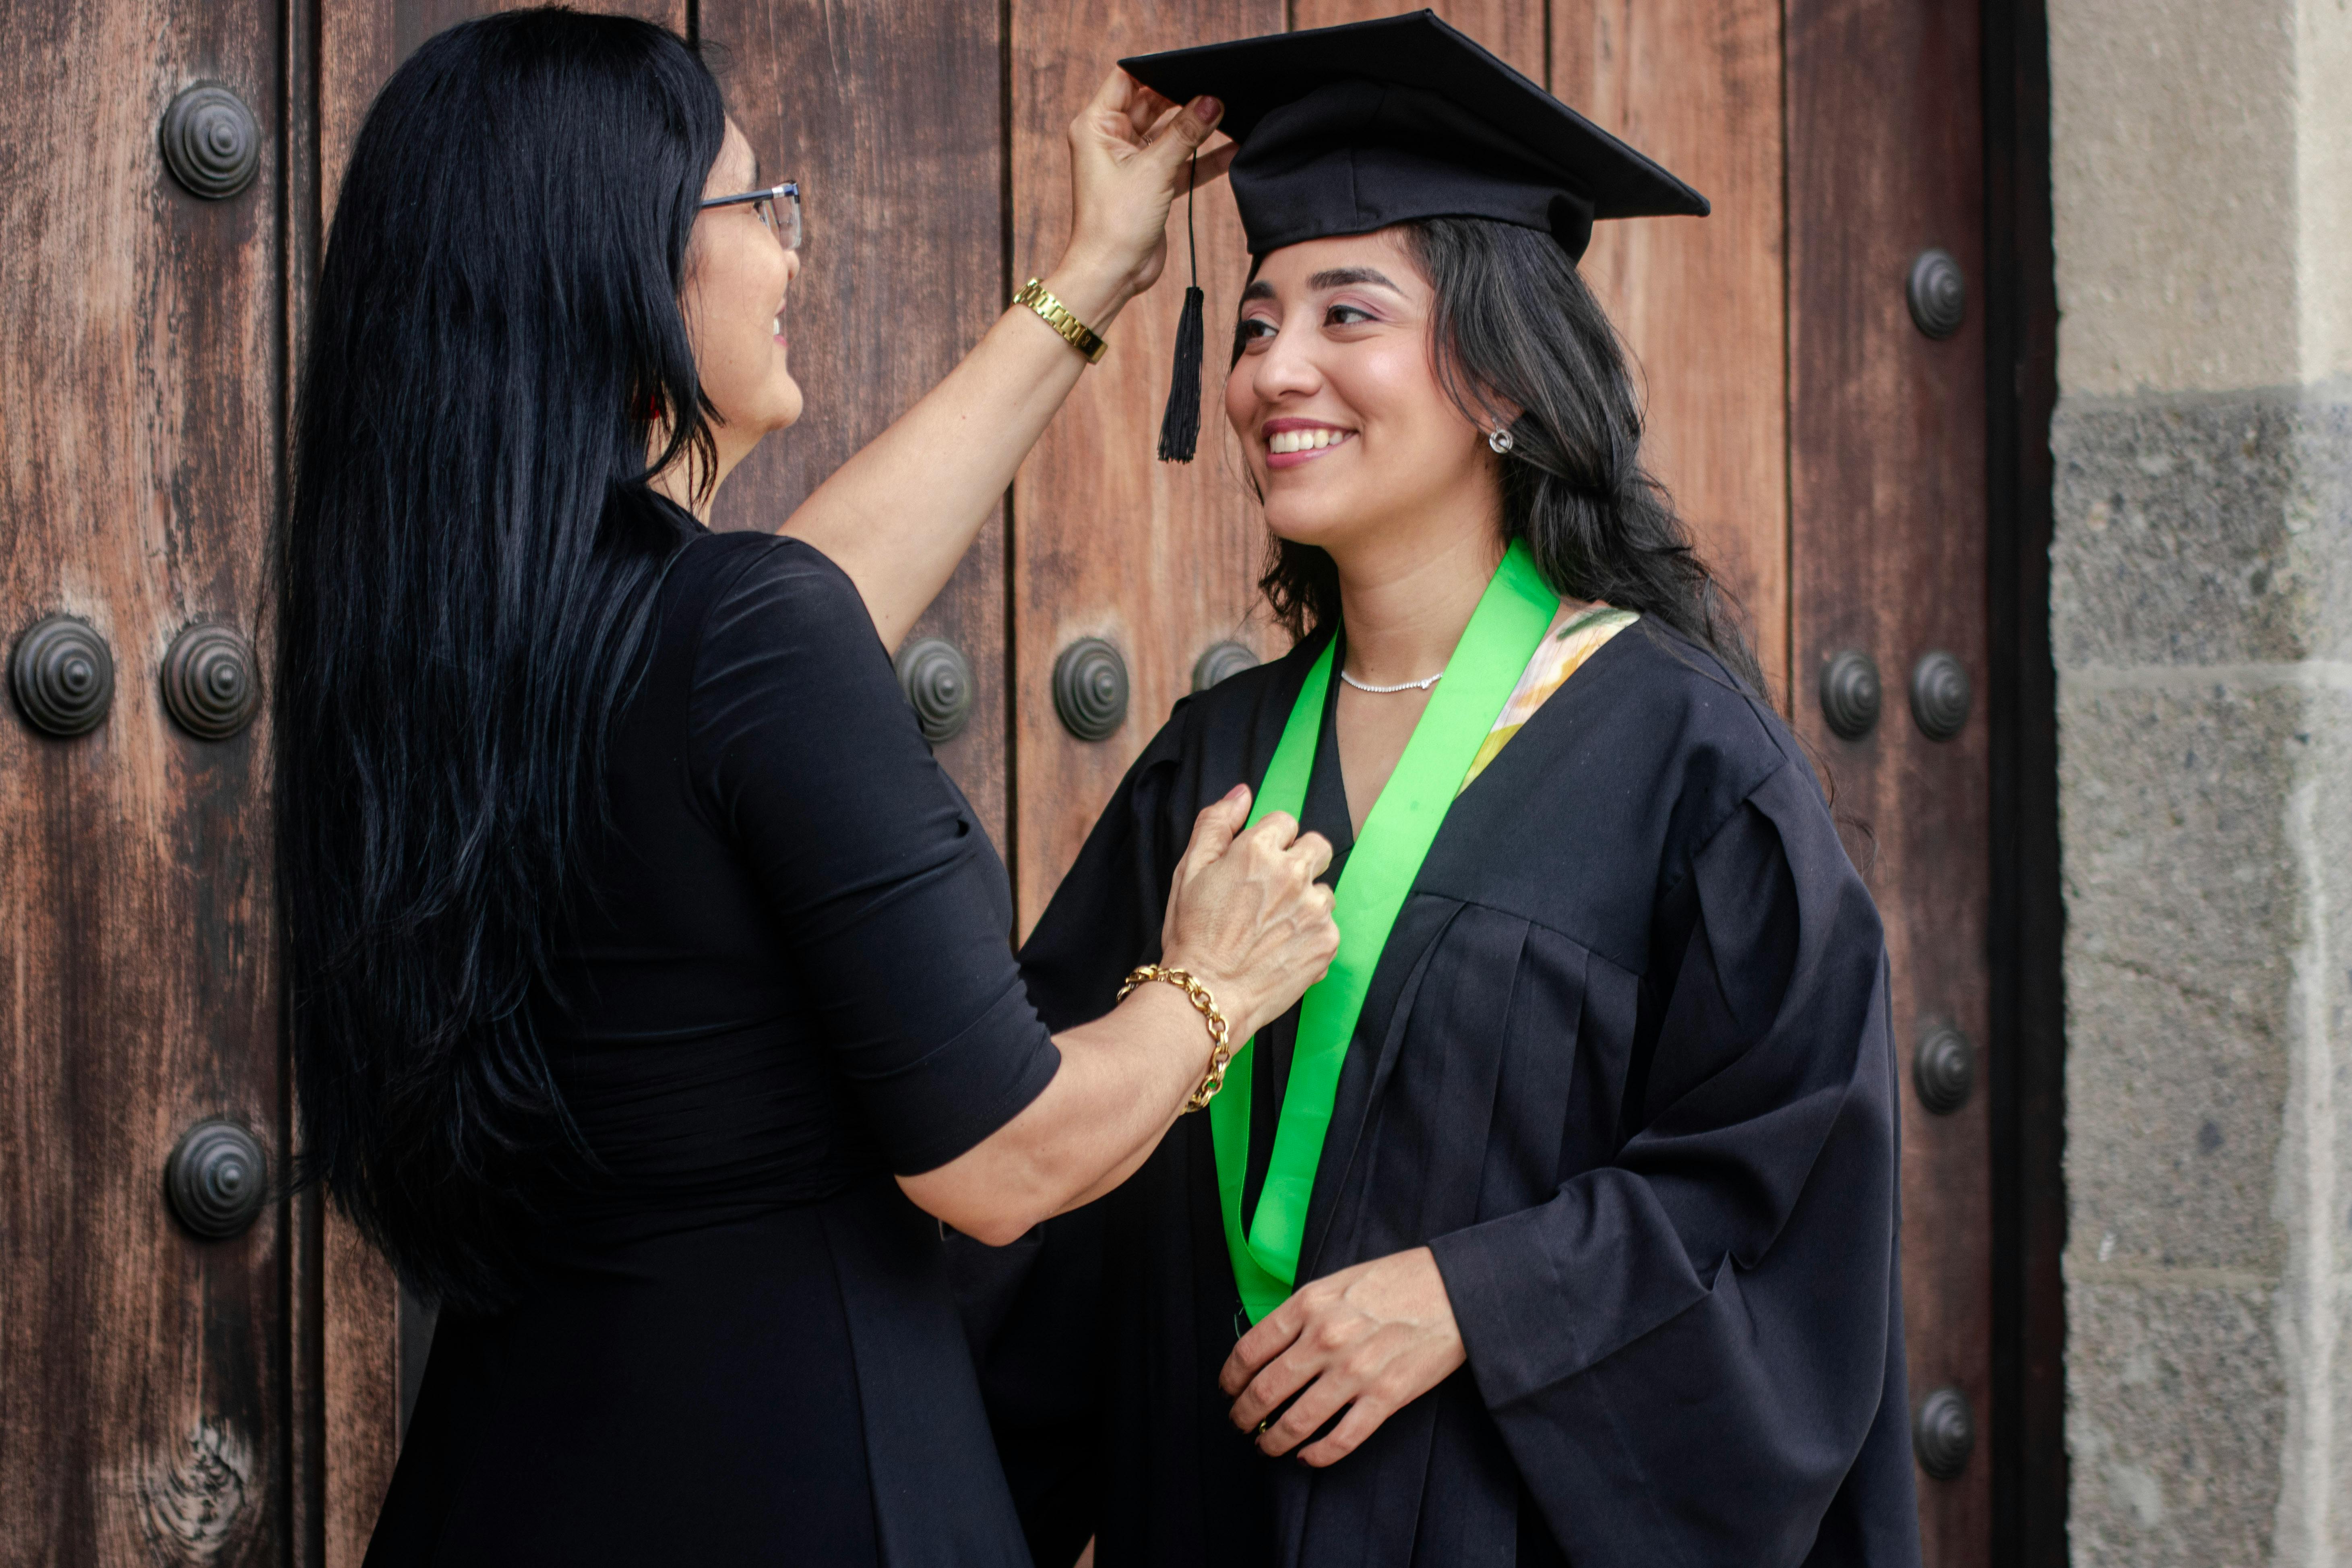 A happy woman celebrating her graduation with her mother | Source: Pexels